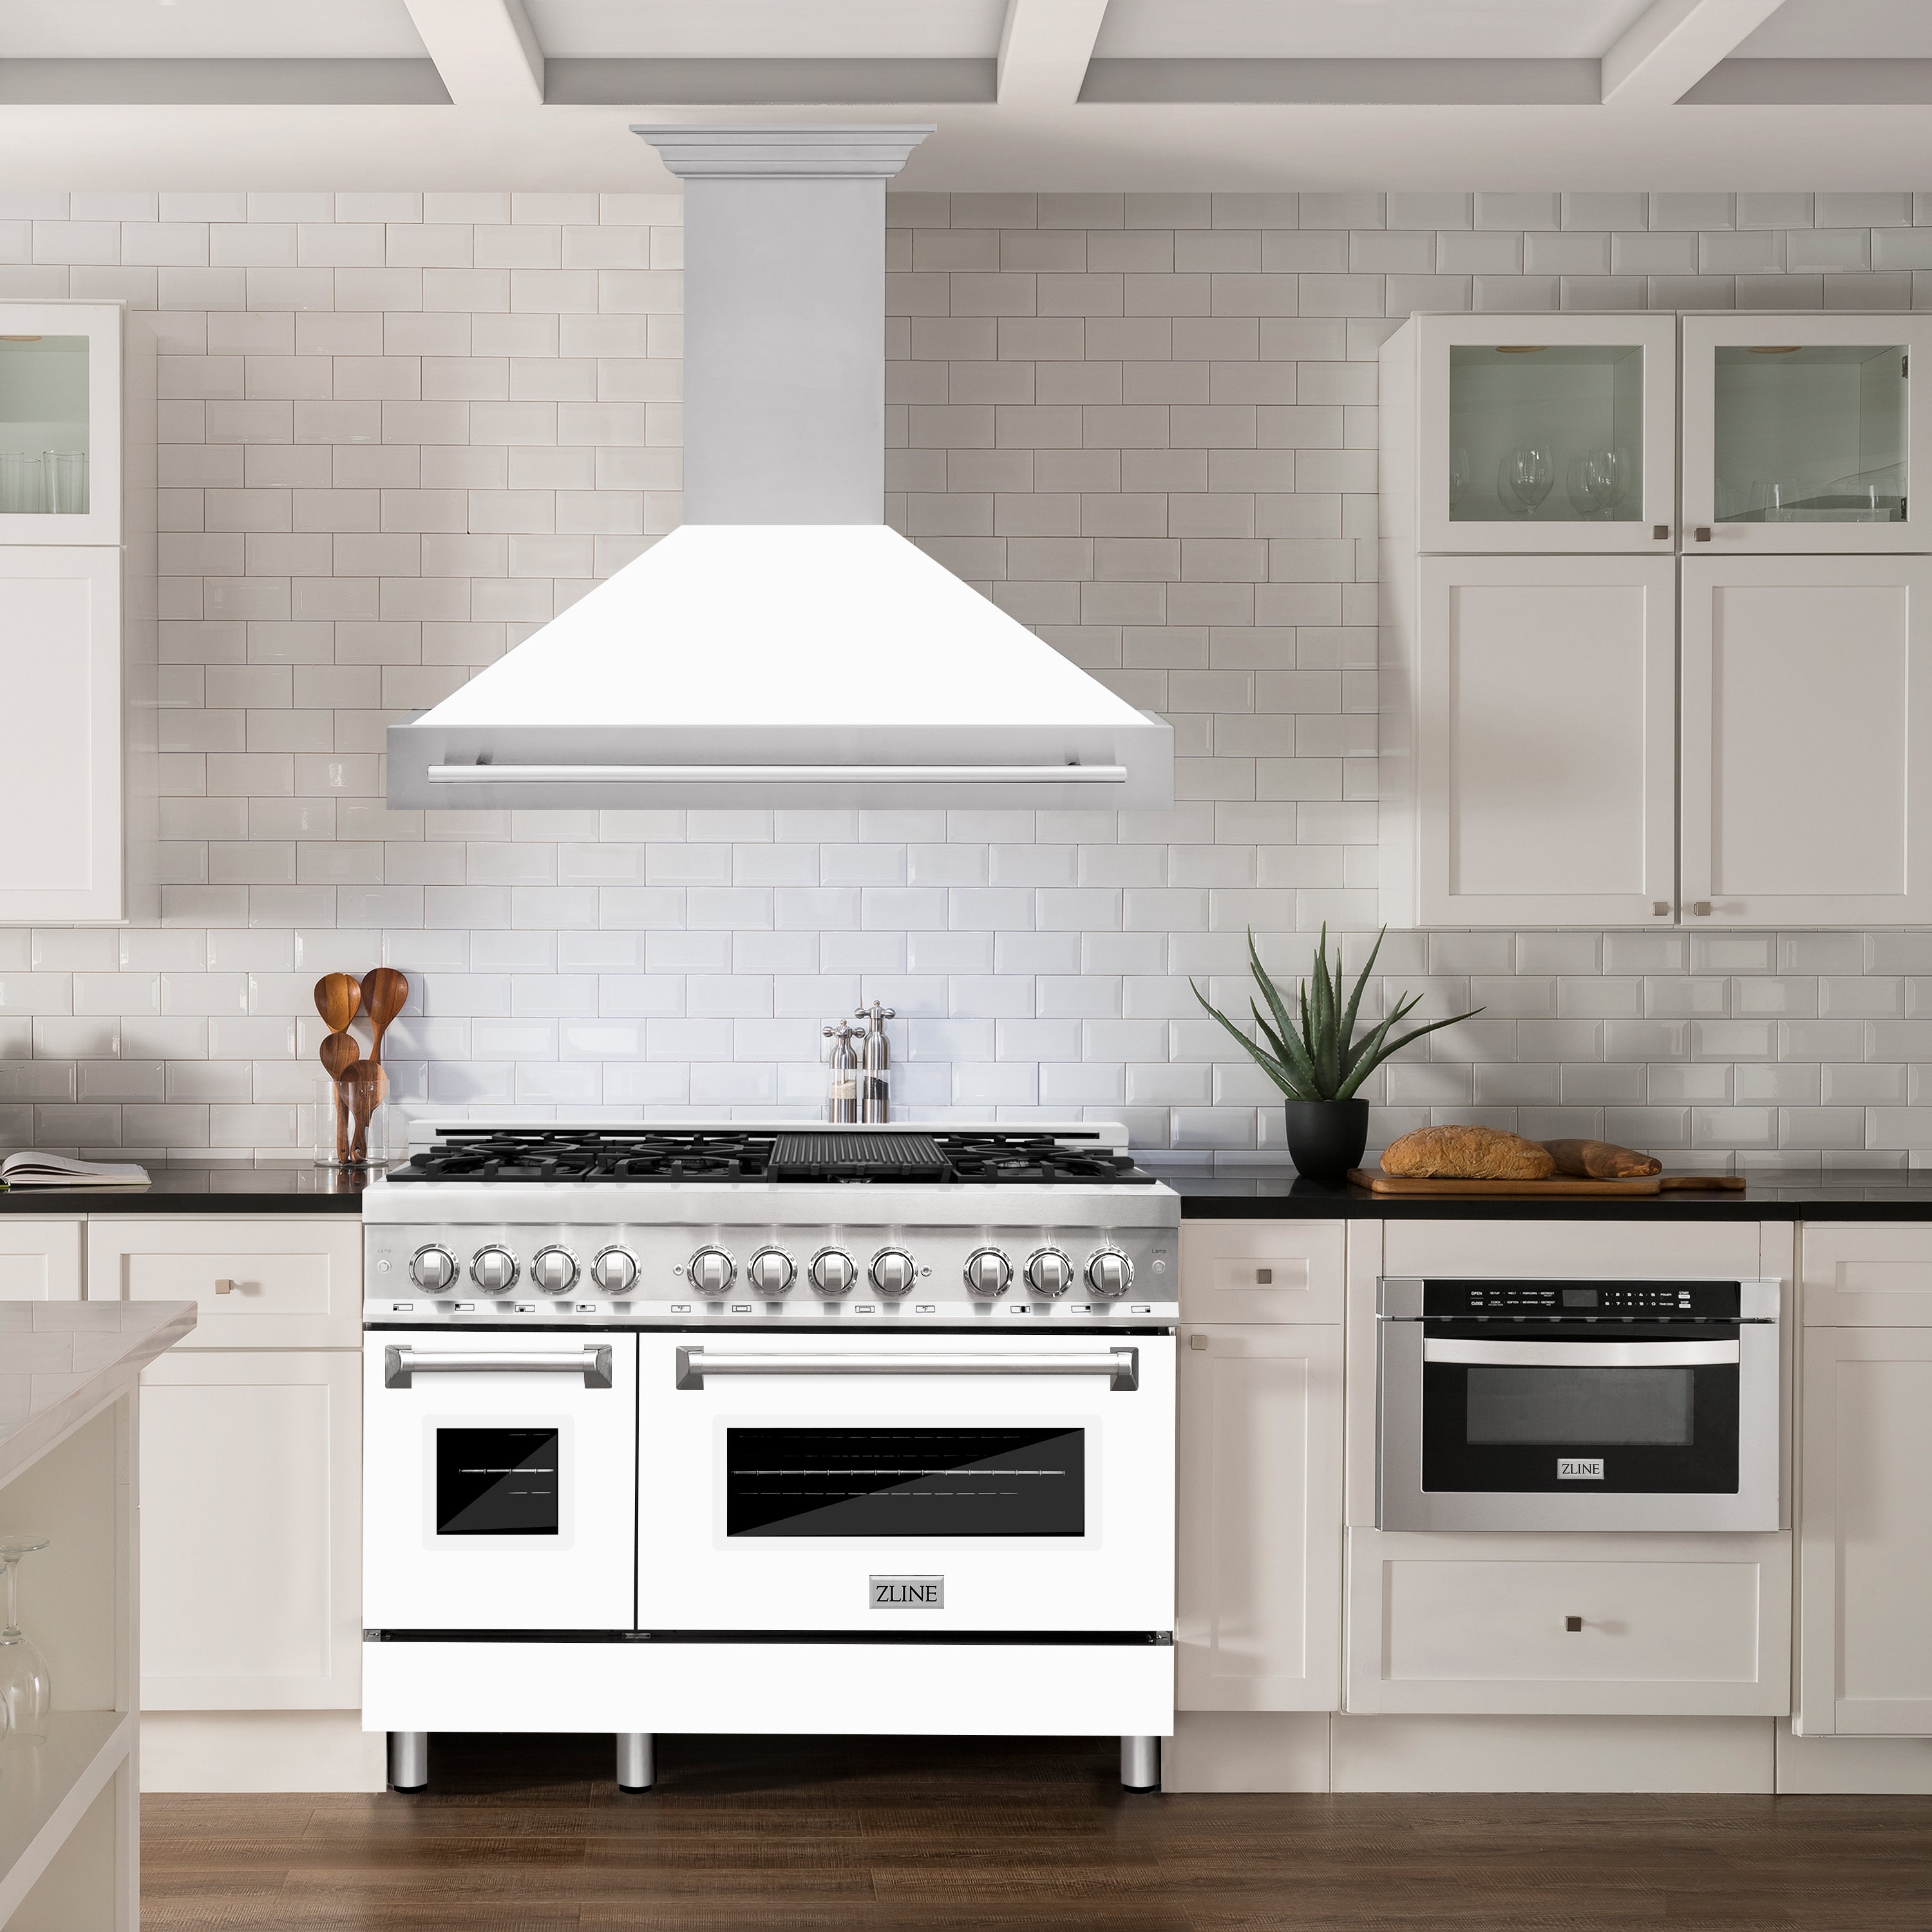 ZLINE 48" Stainless Steel Range Hood with White Matte Shell and Stainless Steel Handle (8654STX-WM-48)